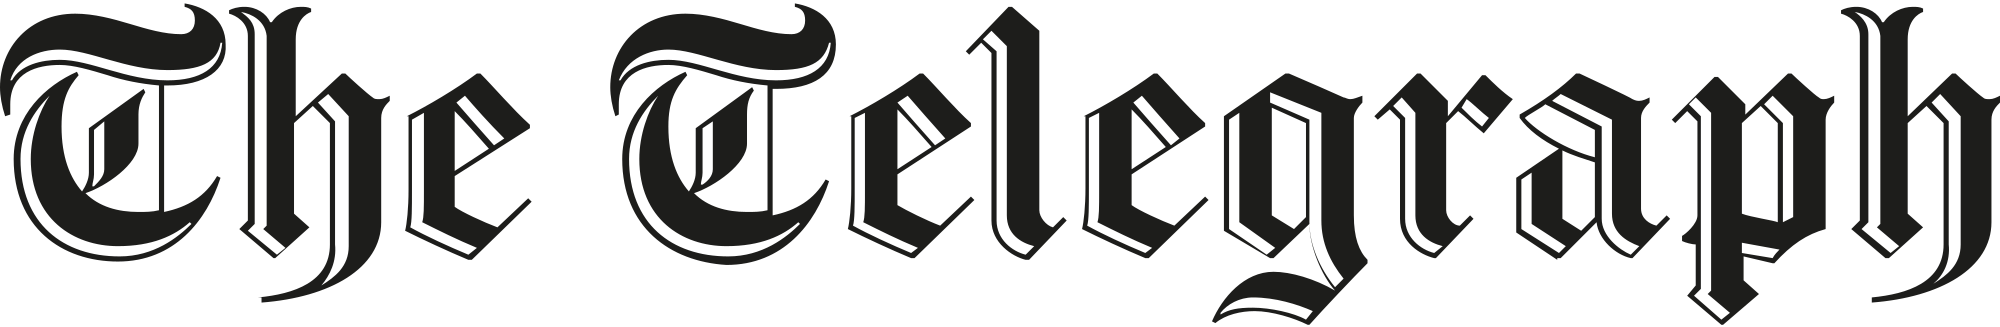 Image result for the telegraph logo